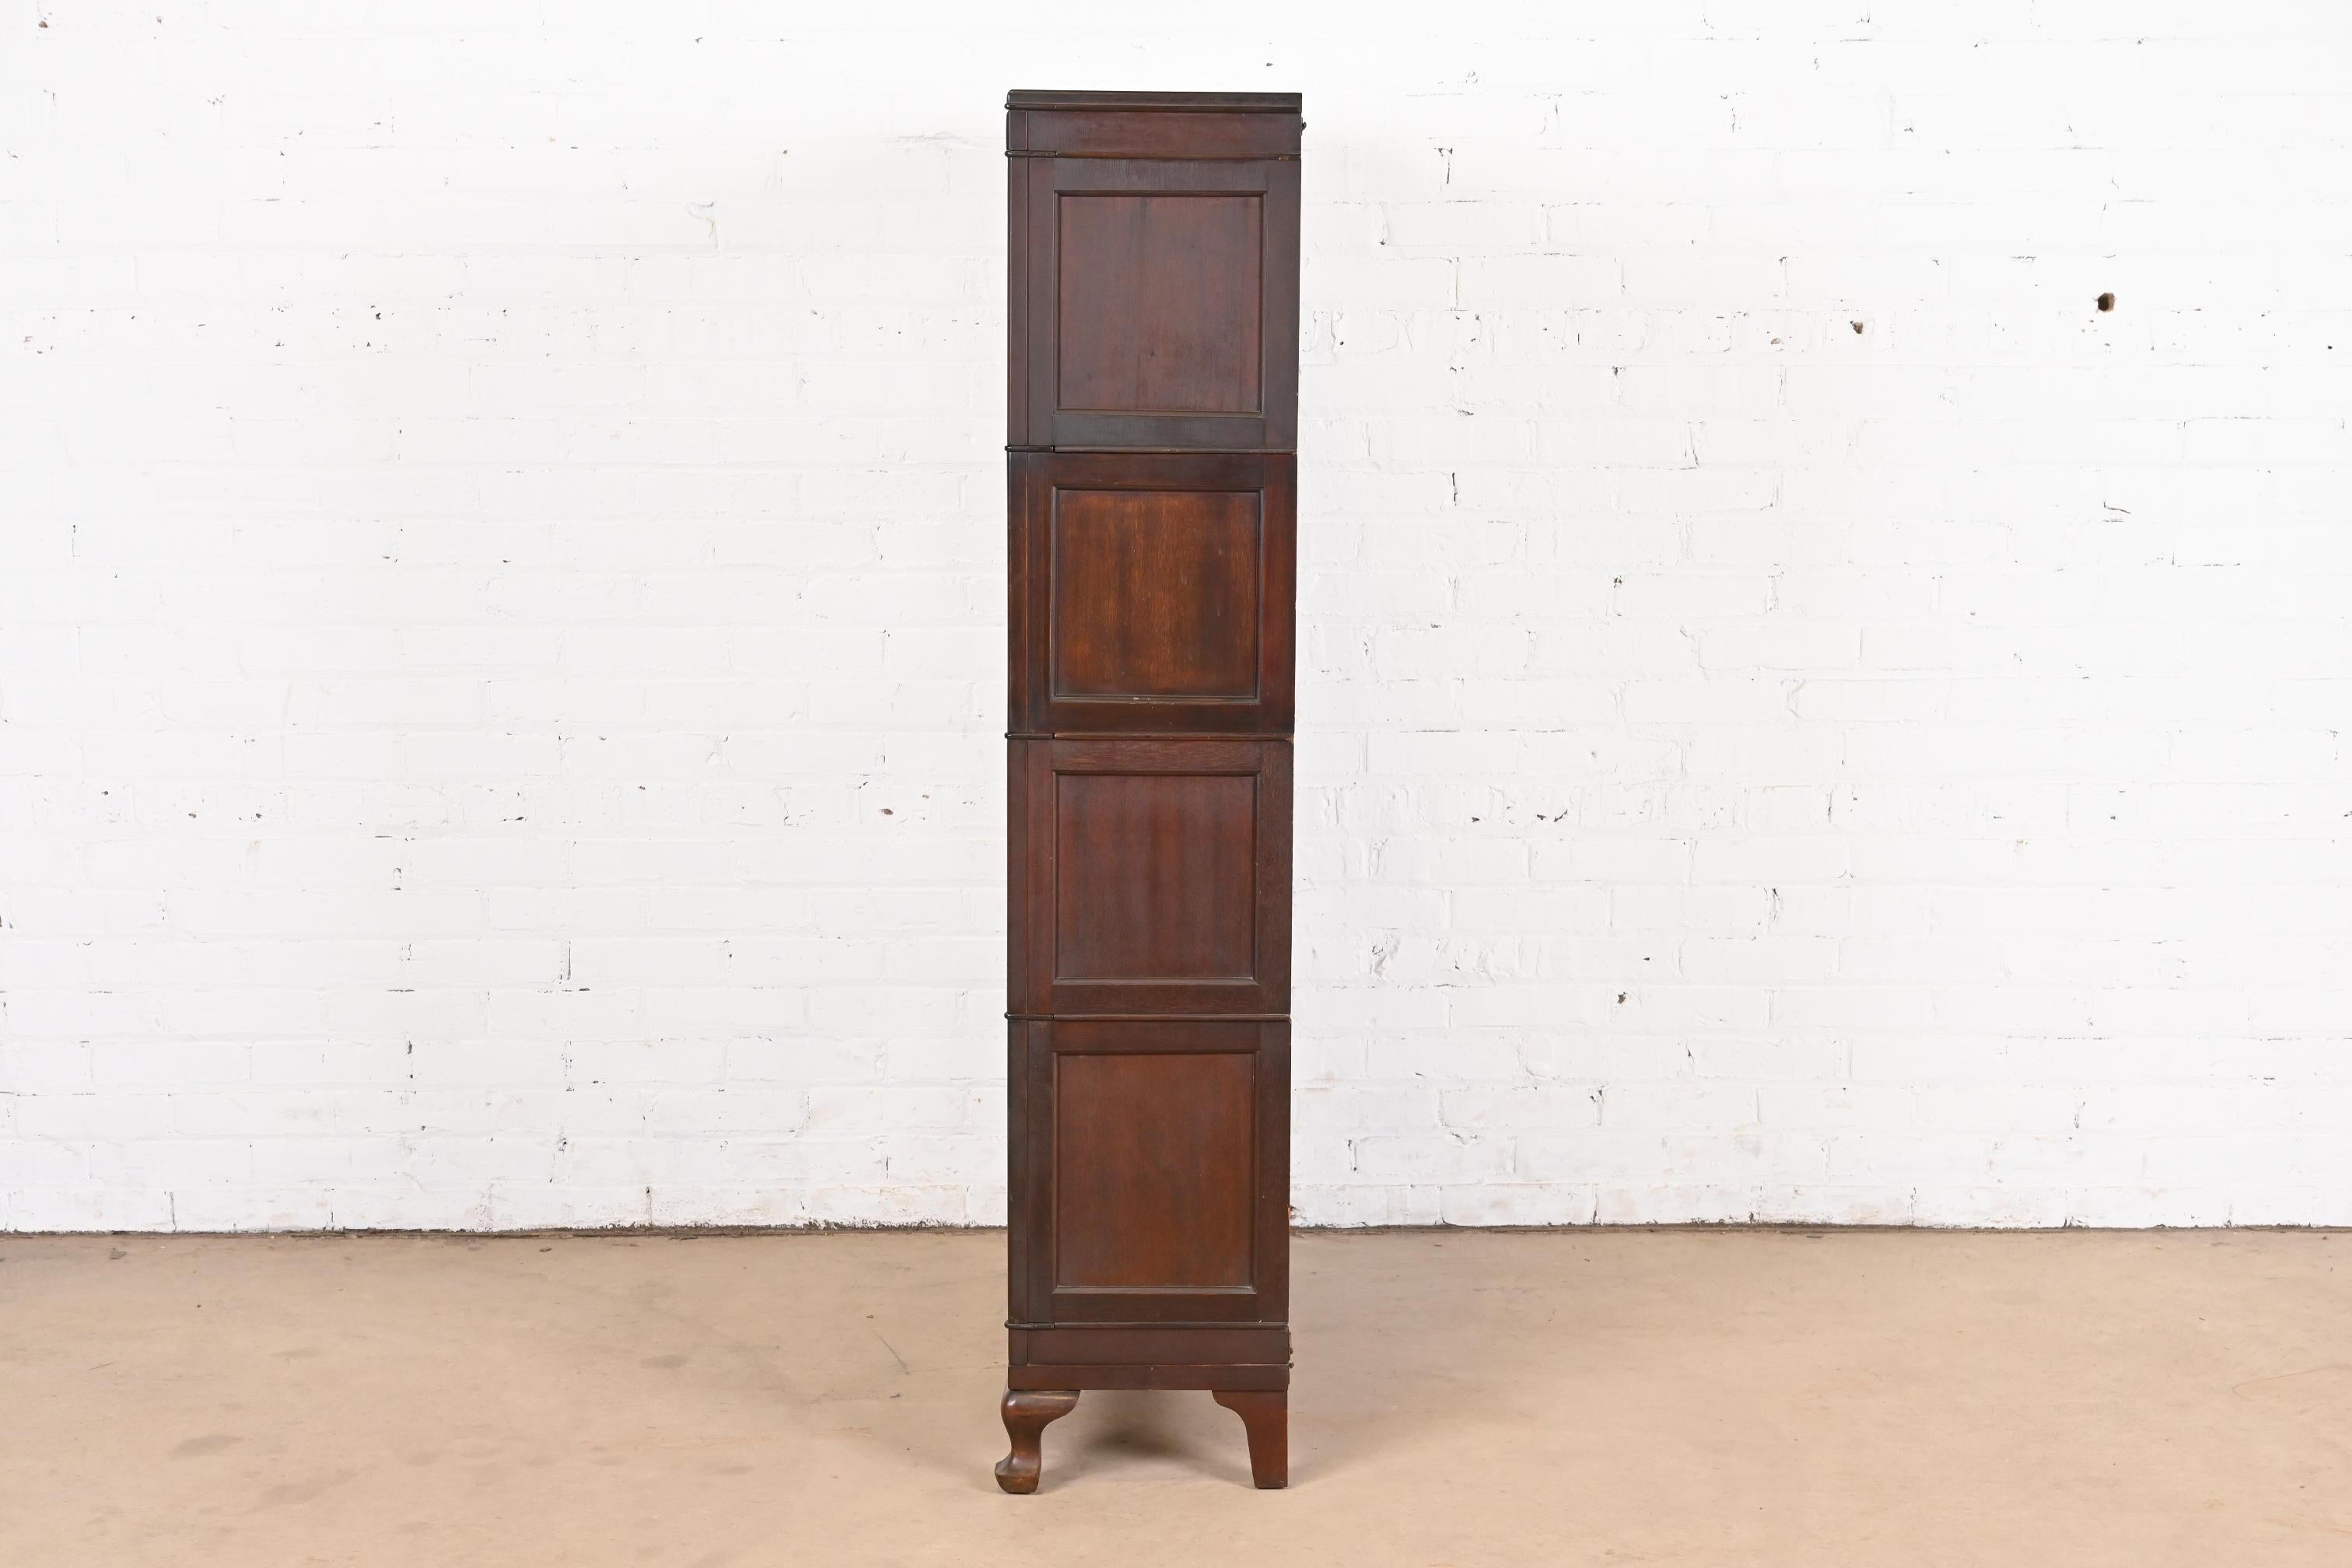 Antique Arts & Crafts Mahogany Four-Stack Barrister Bookcase by Macey, 1920s For Sale 2